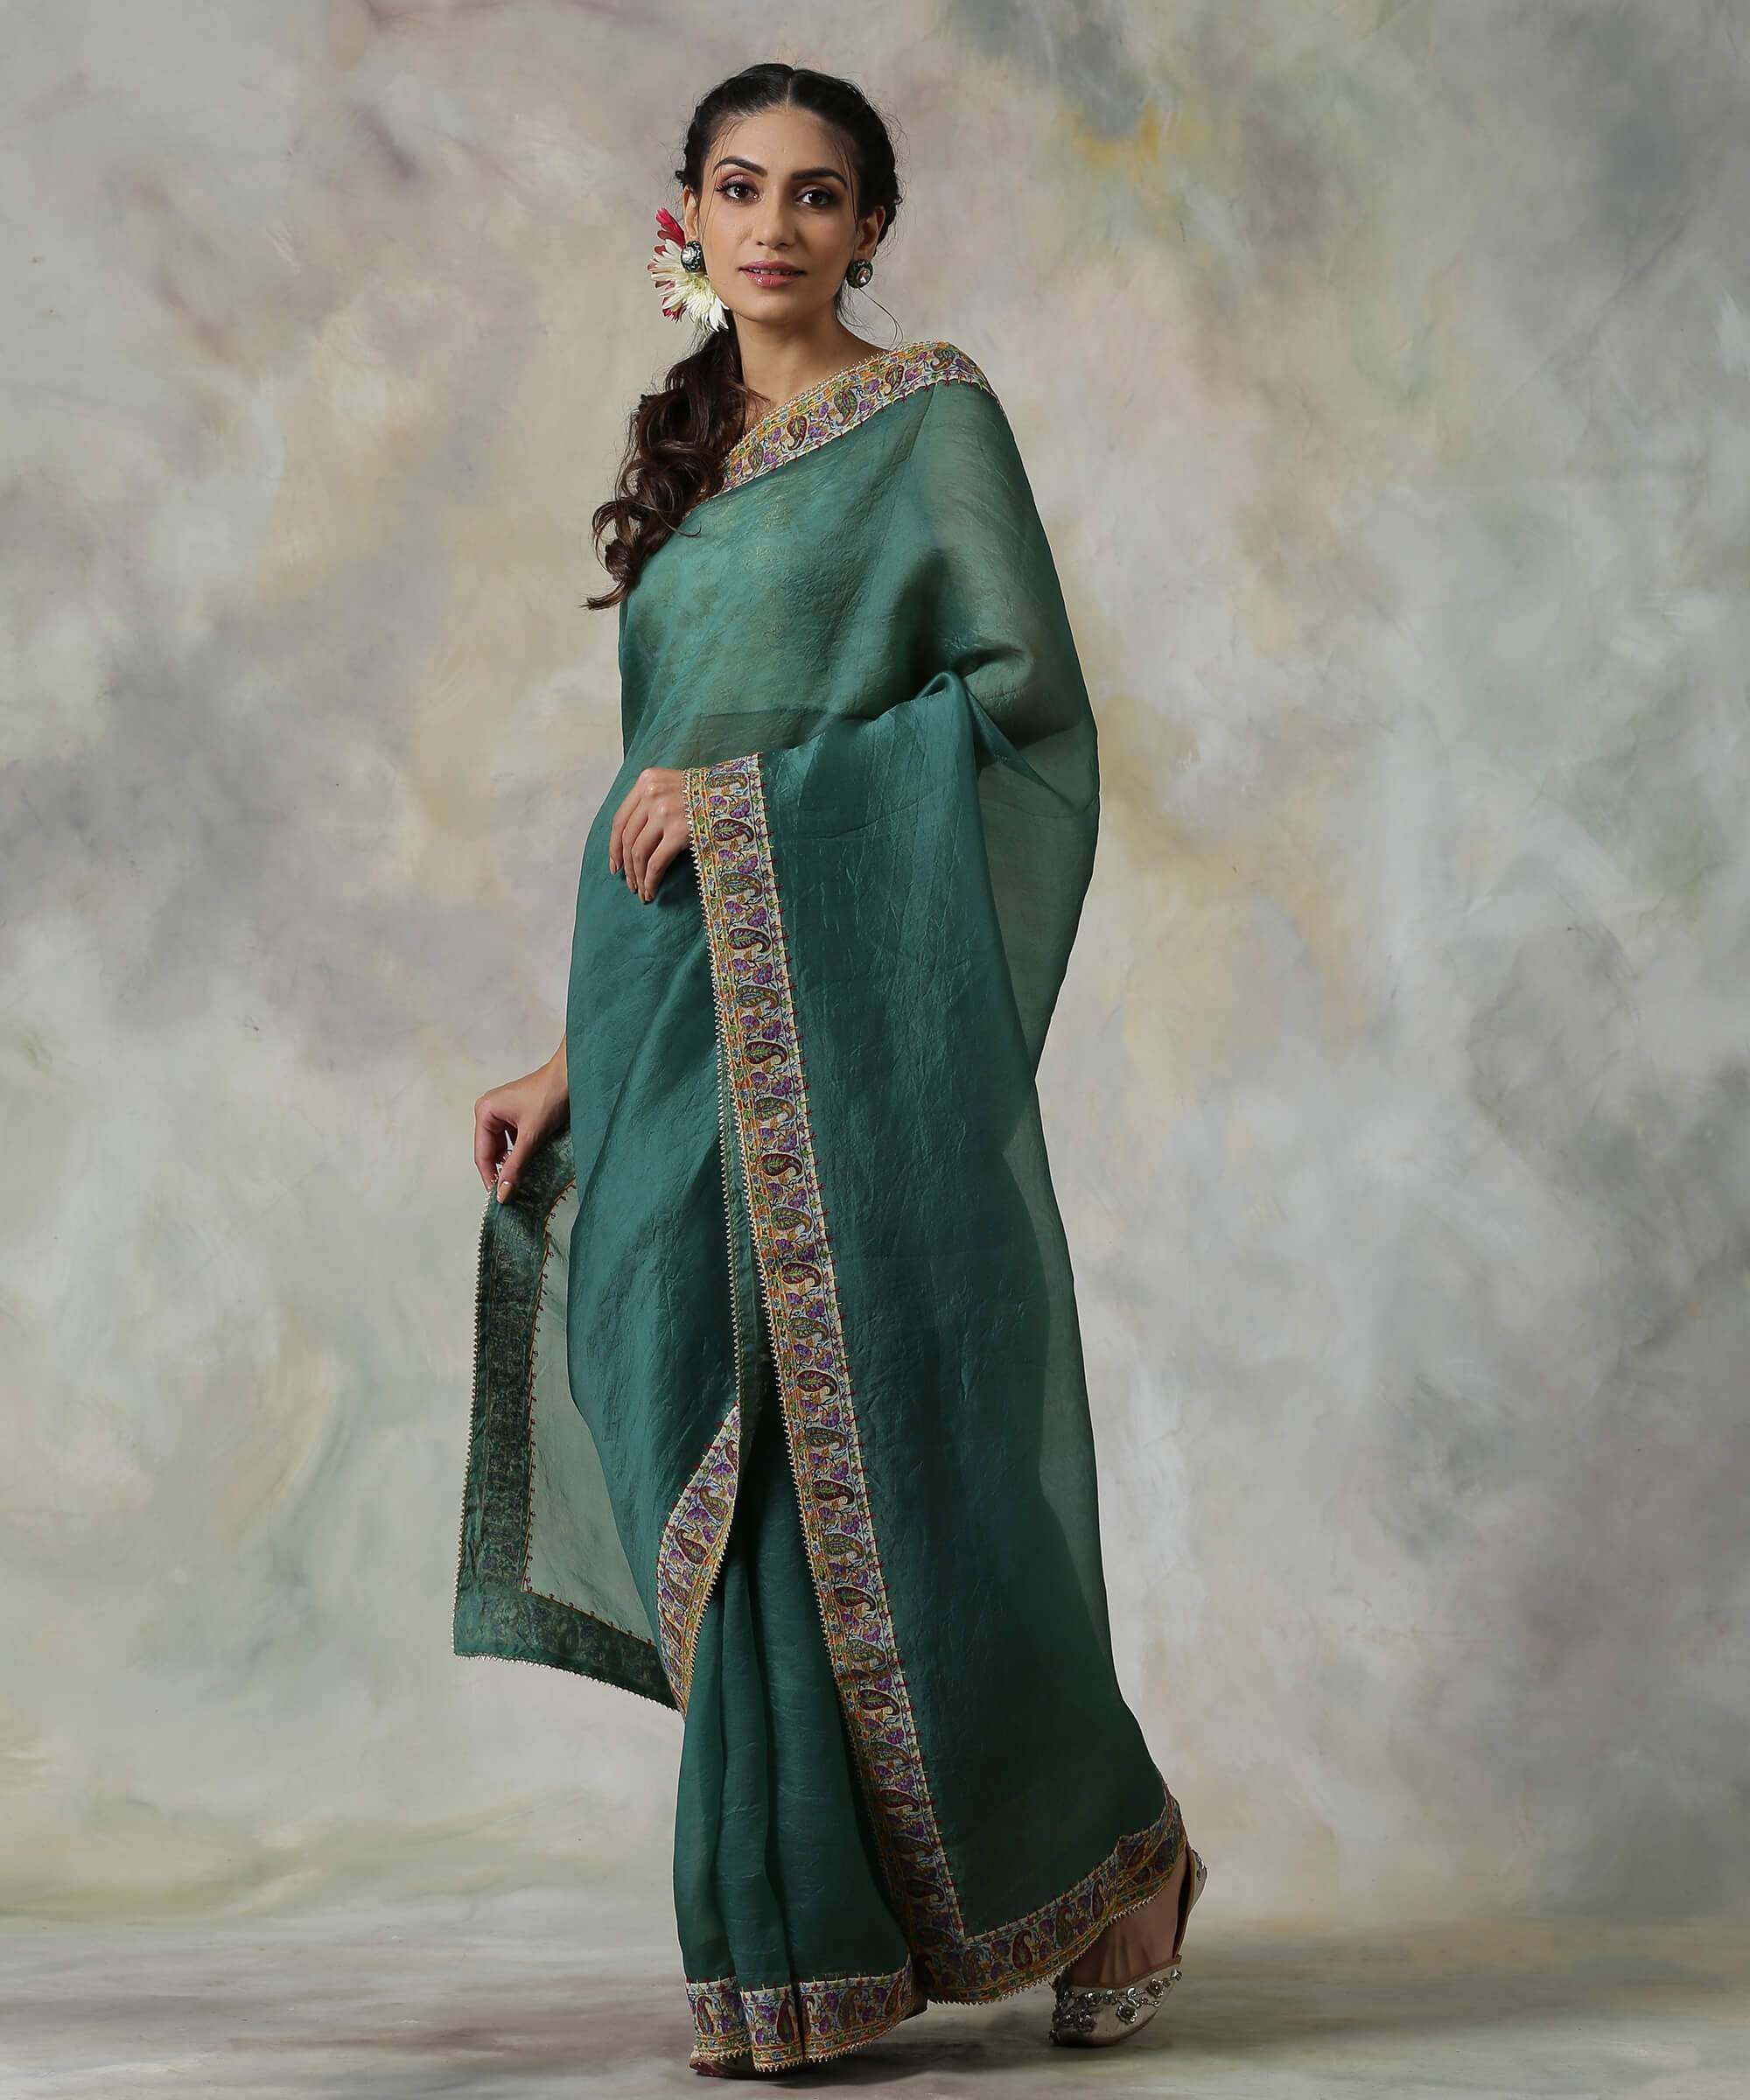 Persian_Green_Organza_Saree_With_with_Hand_Appliqued_Sozni_Needle_Work_Border_WeaverStory_02